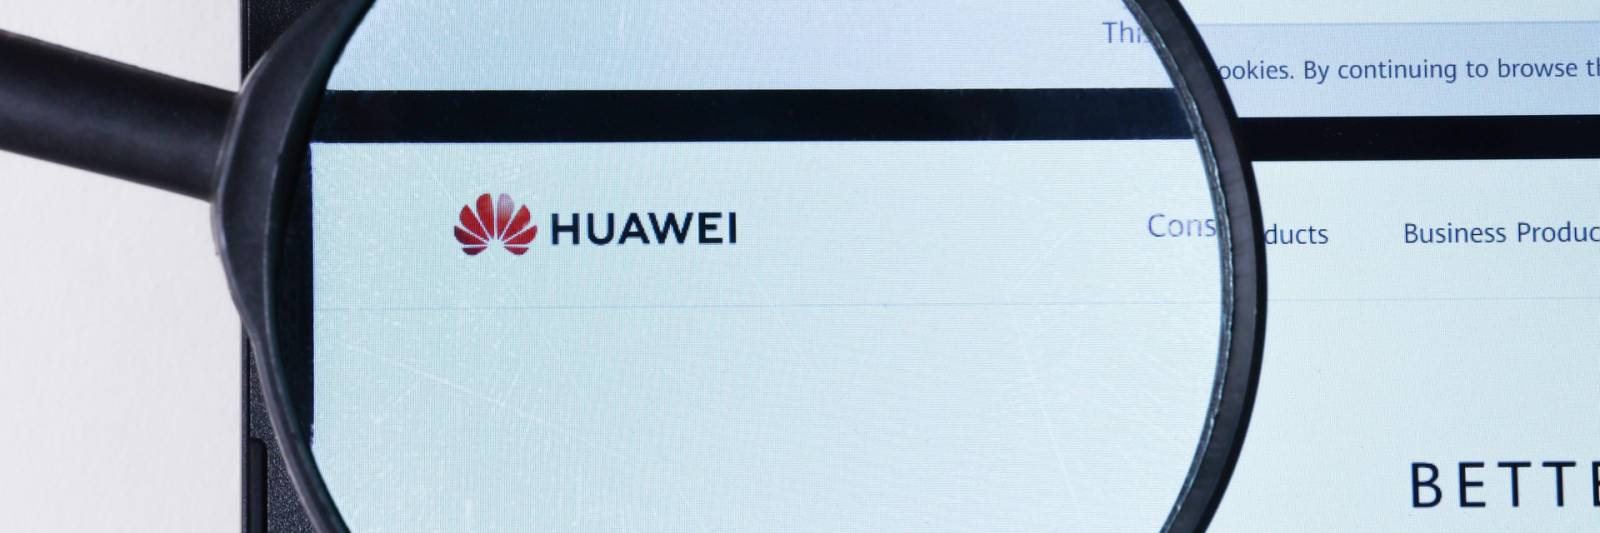 hackers spoofed huawei website to steal 5g information